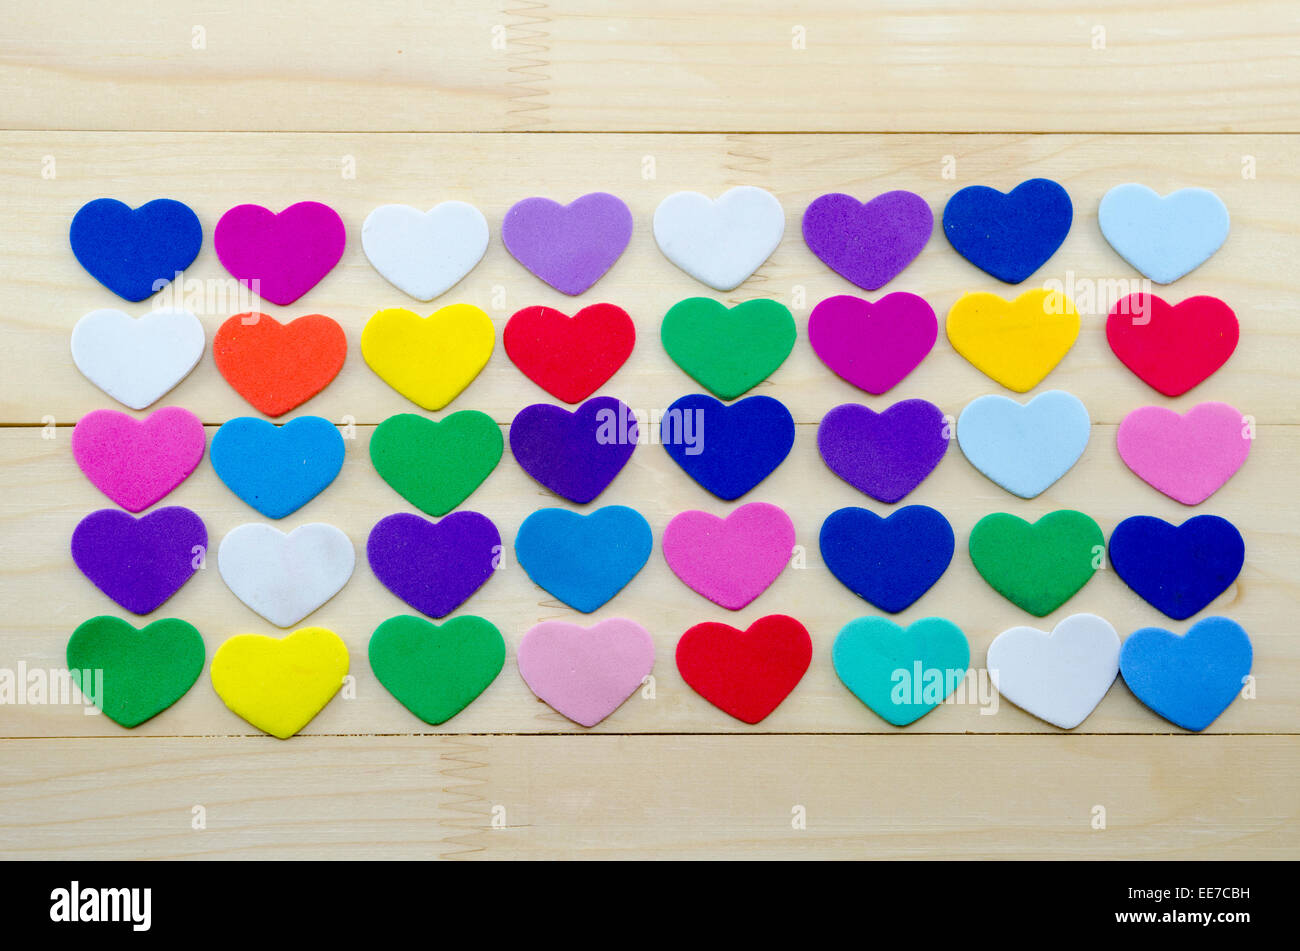 Lots of colorful paper hearts on a wooden table Stock Photo